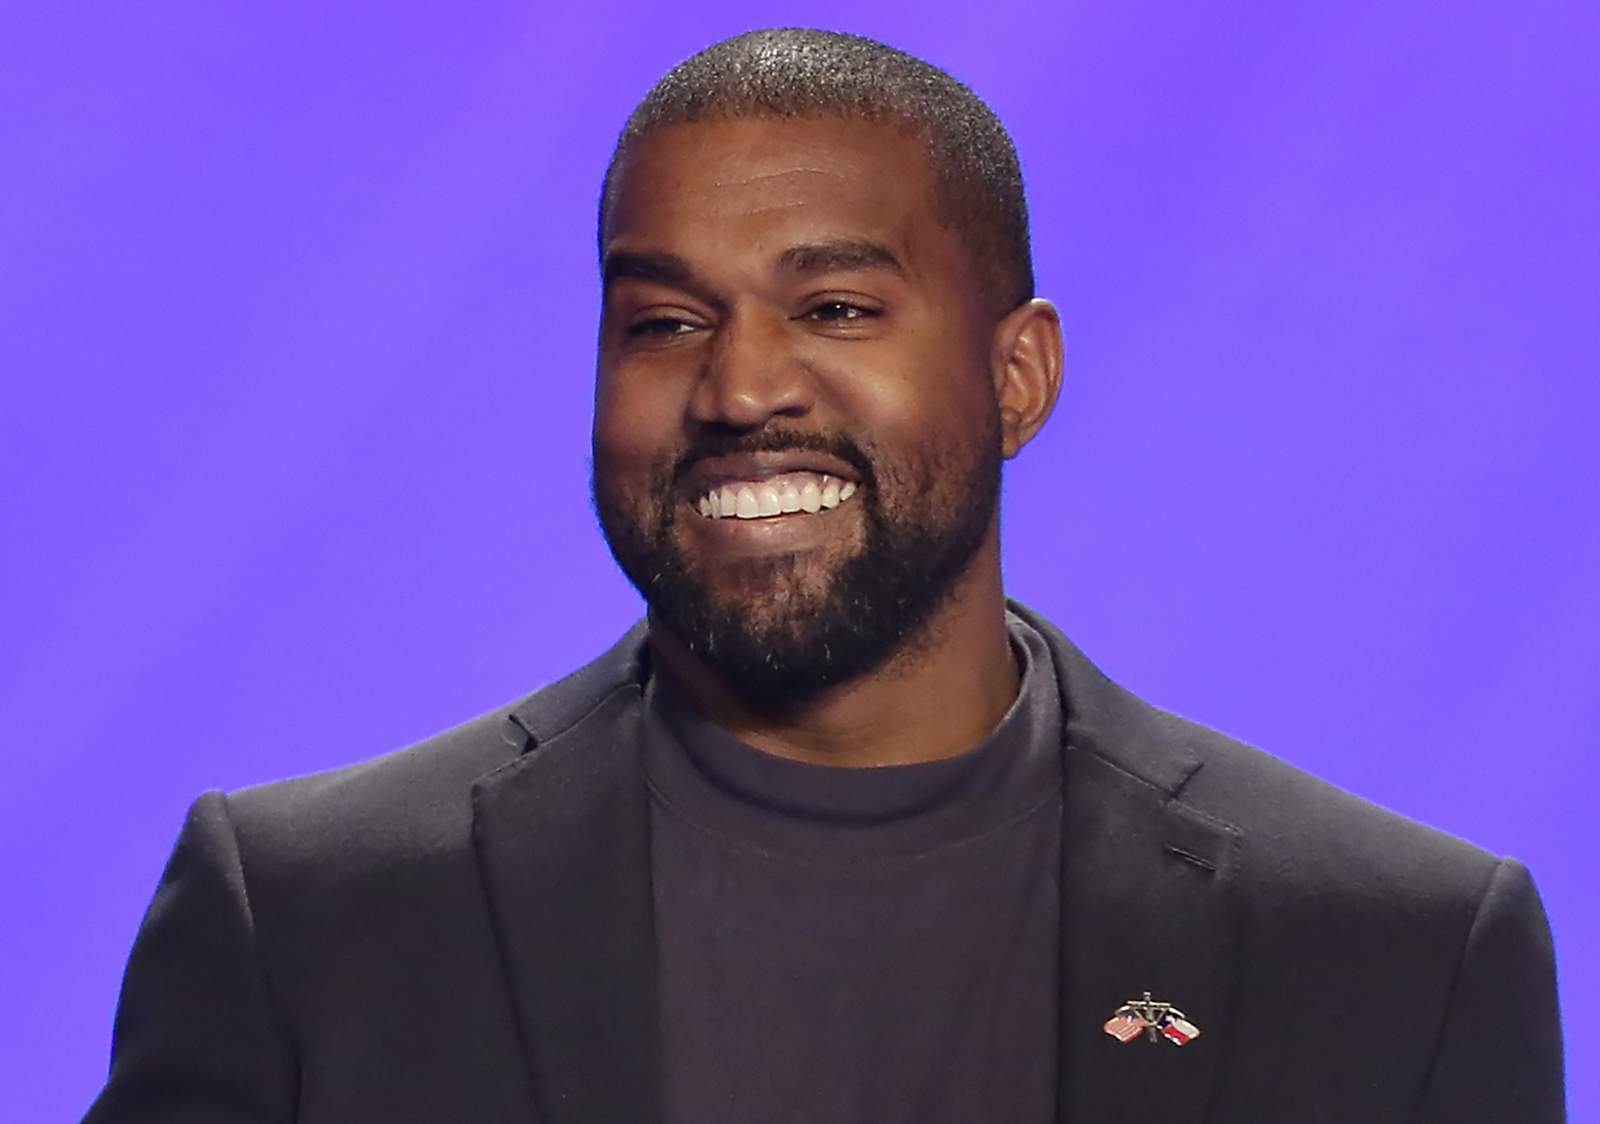 It’s official: Kanye West won’t appear on Virginia’s ballots this Election Day